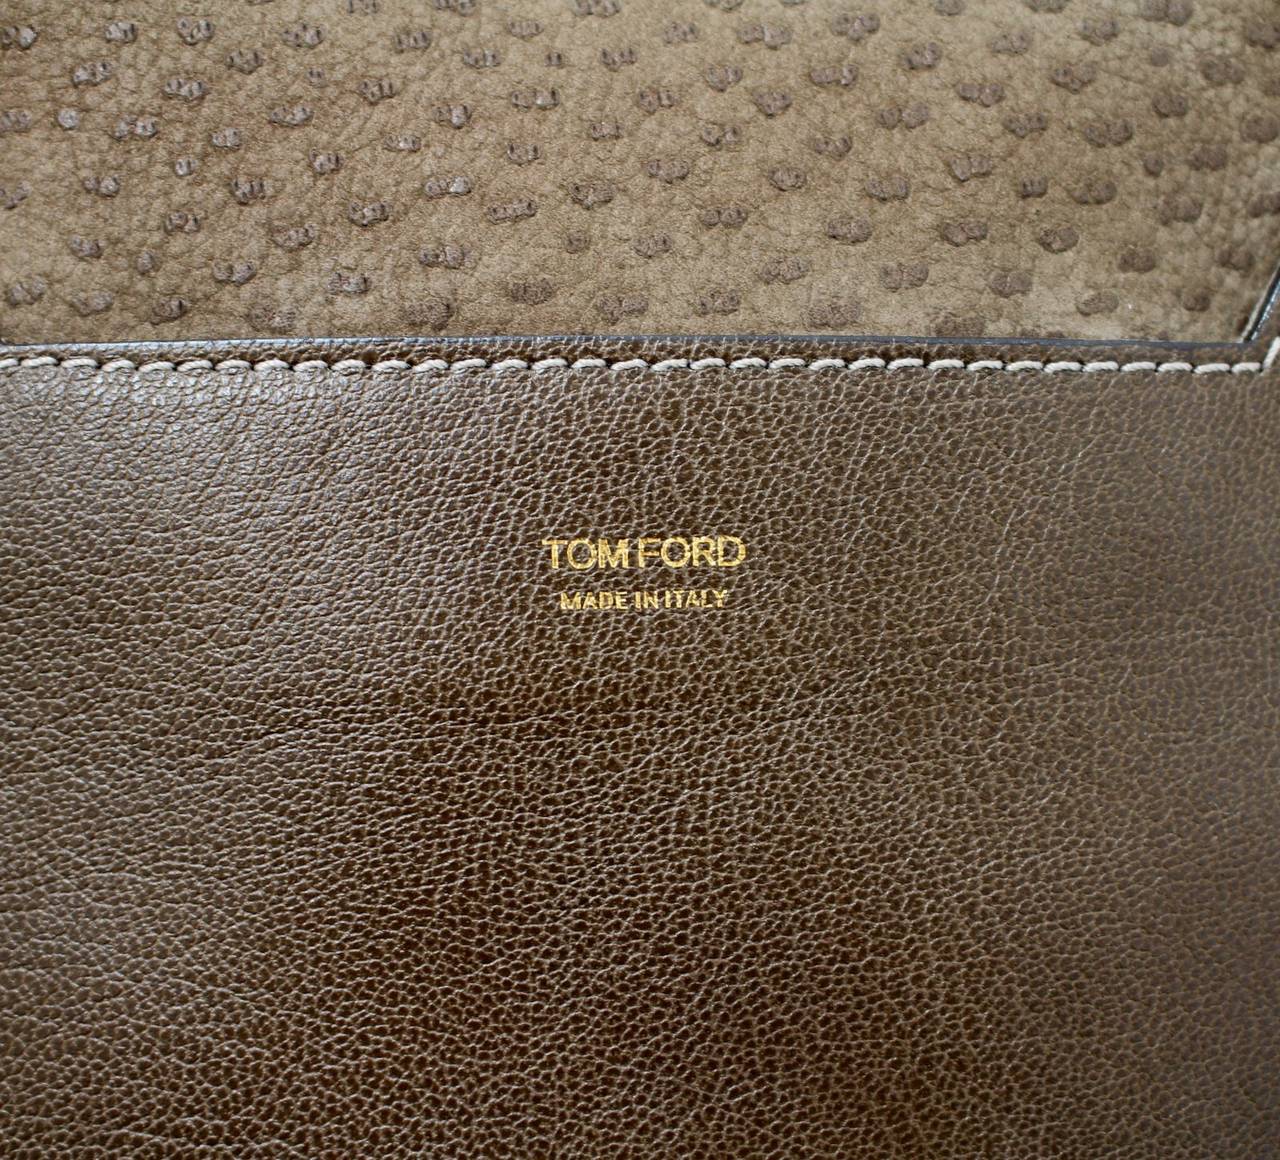 Tom Ford Jennifer Bag-SOLD OUT Peccary Stamped Leather 4